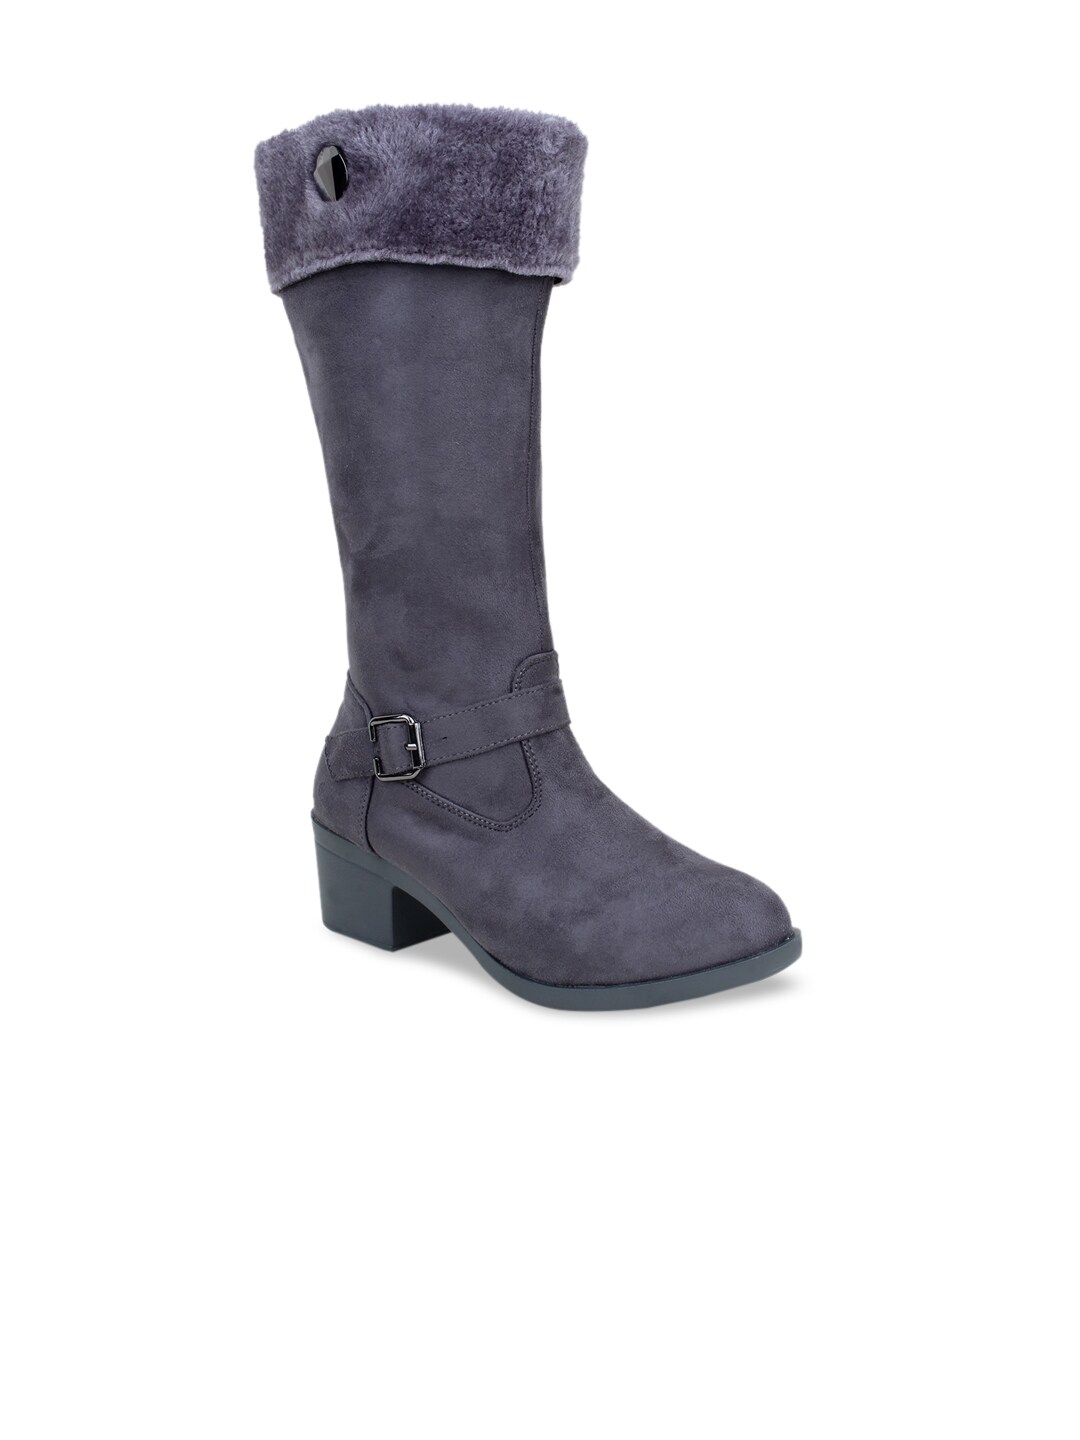 MSC Women Grey Solid Heeled Boots Price in India